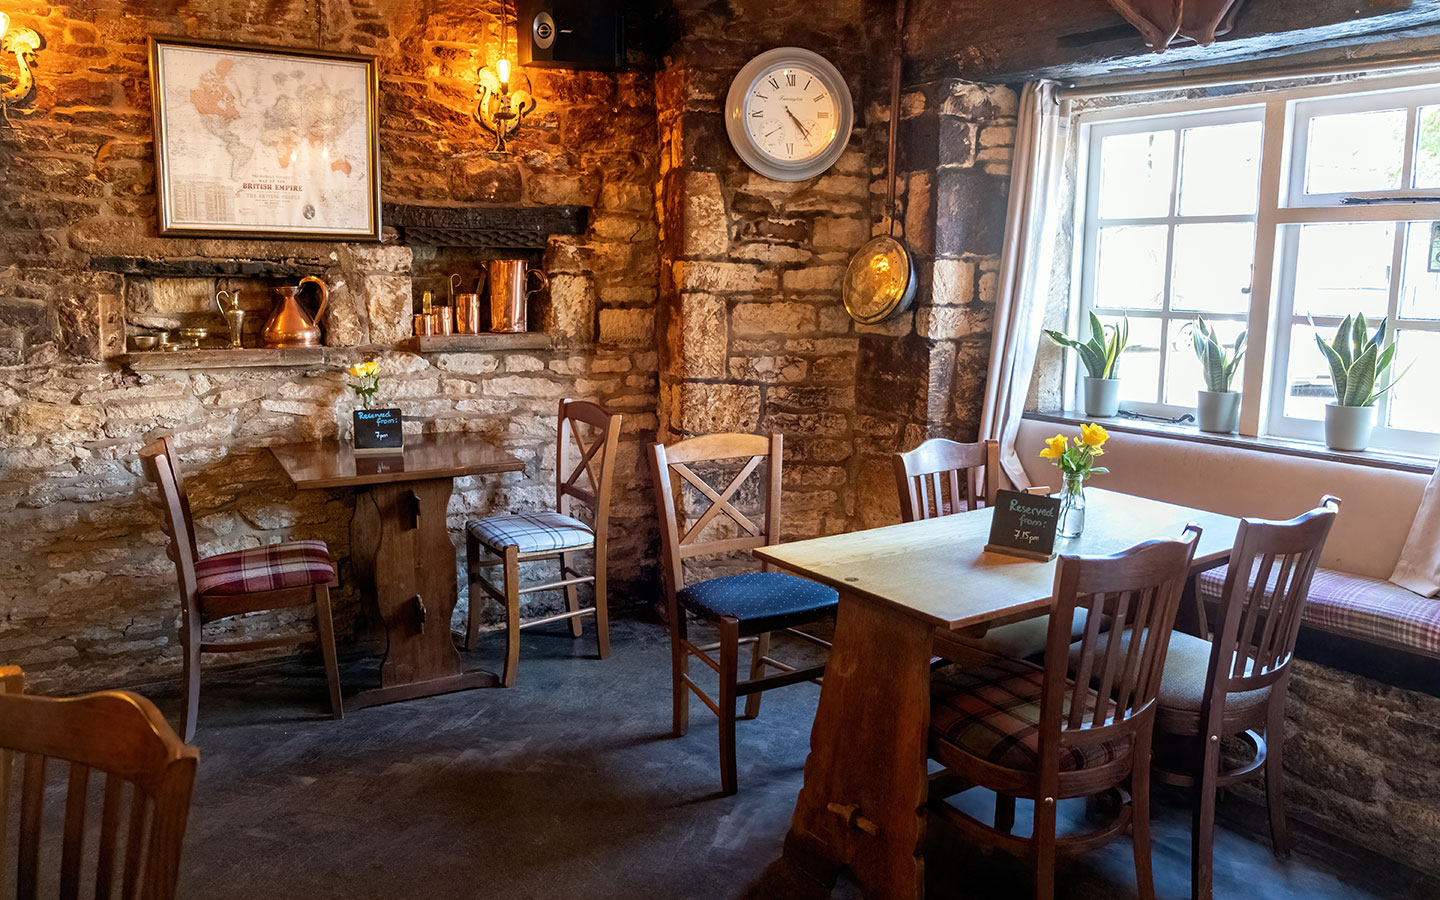 Traditional interiors at the Queen's Head pub in Stow